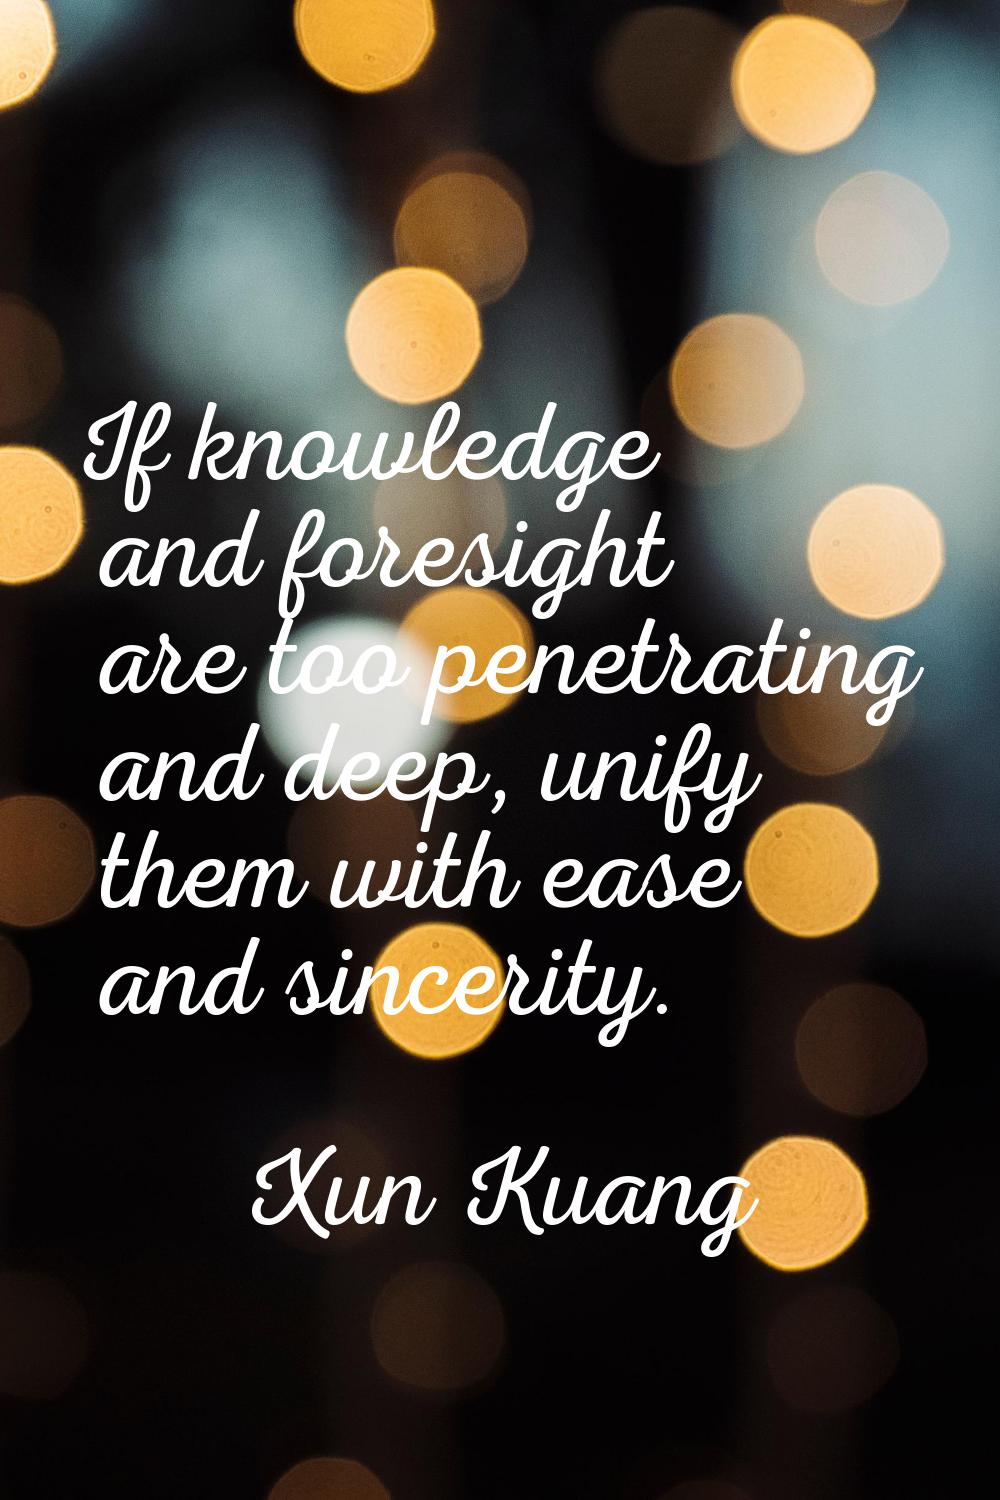 If knowledge and foresight are too penetrating and deep, unify them with ease and sincerity.